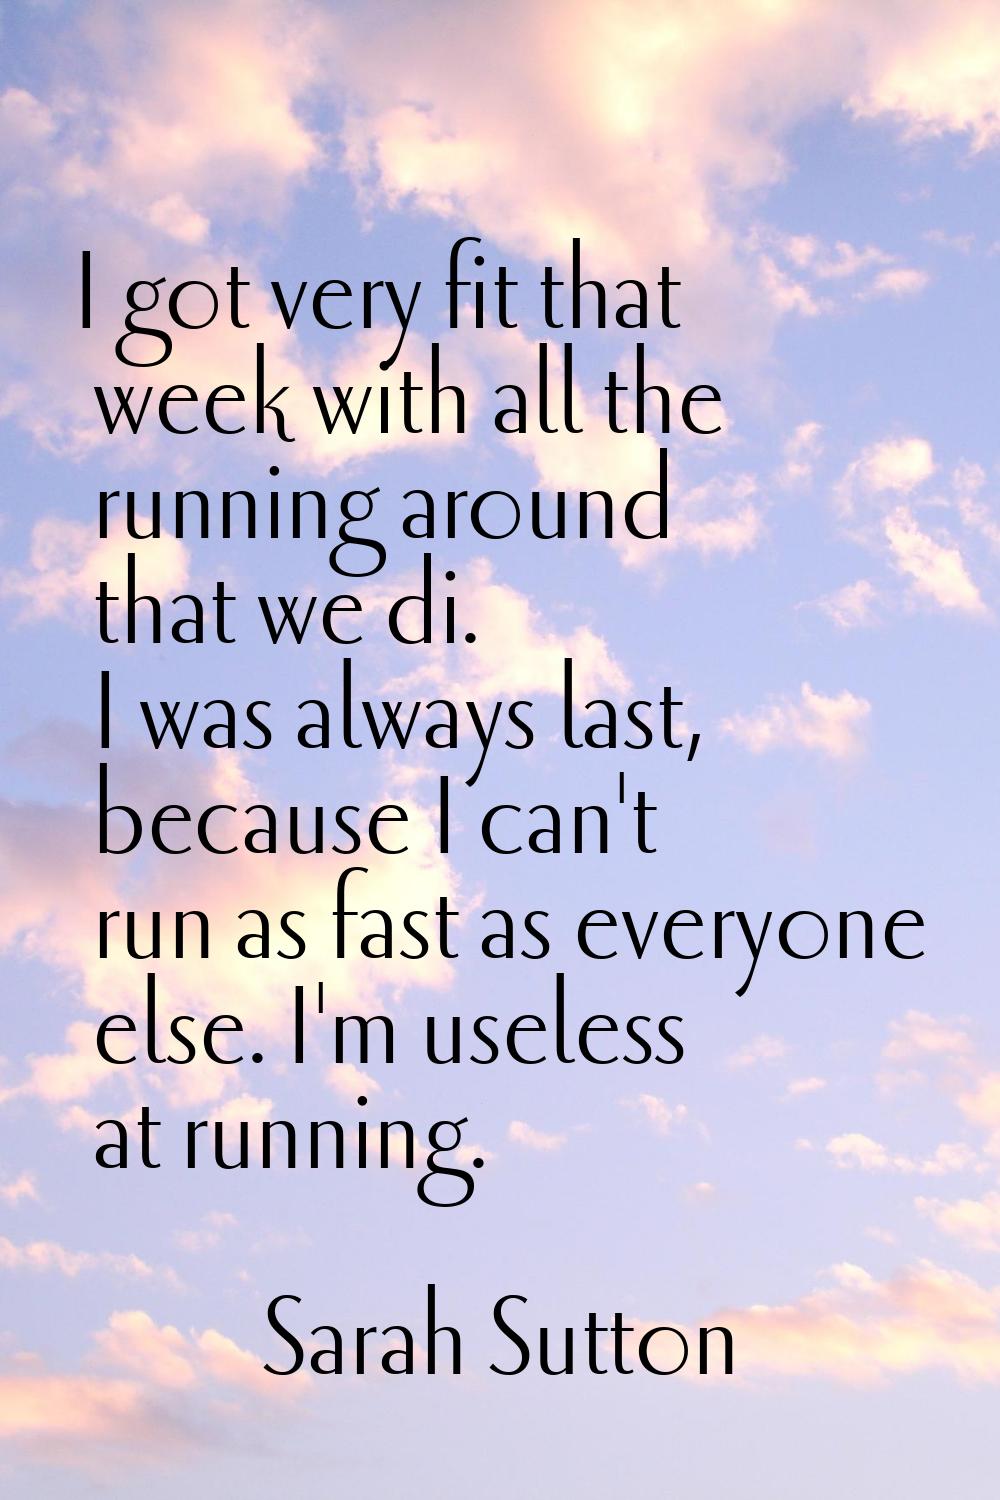 I got very fit that week with all the running around that we di. I was always last, because I can't